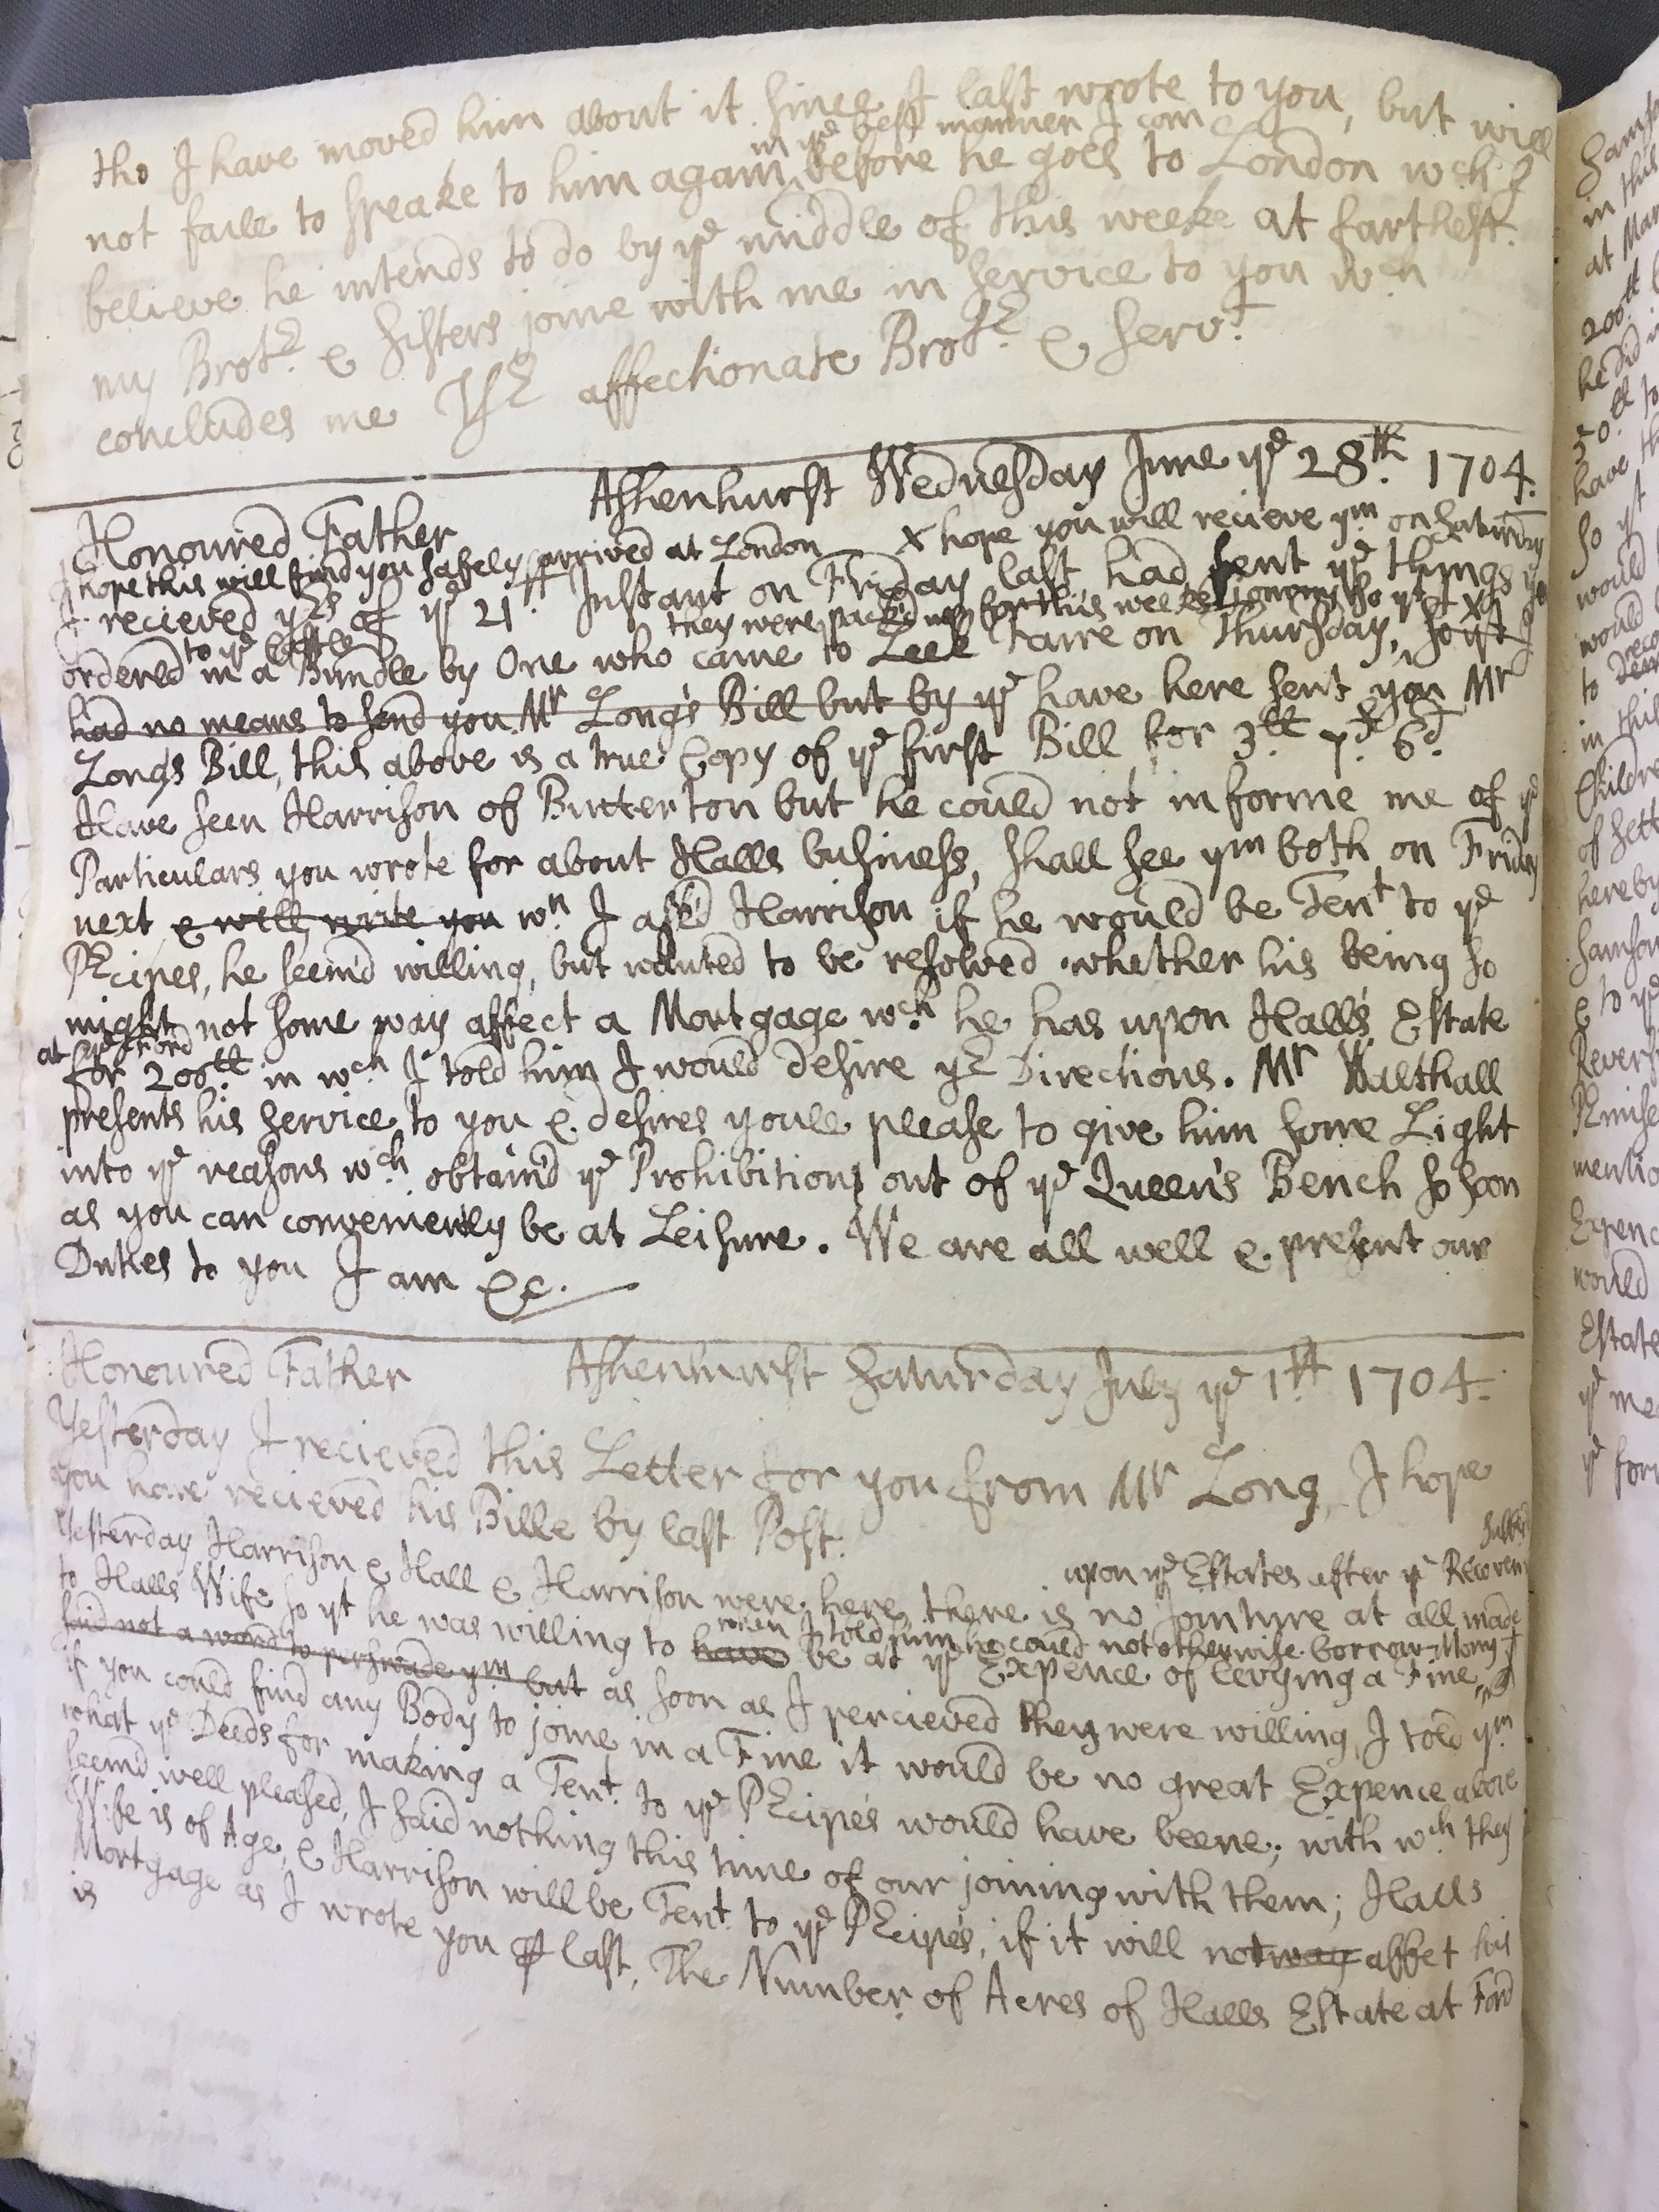 Image #2 of letter: Thomas Hollinshead to his brother-in-law Mr Stanley, 18 June 1704